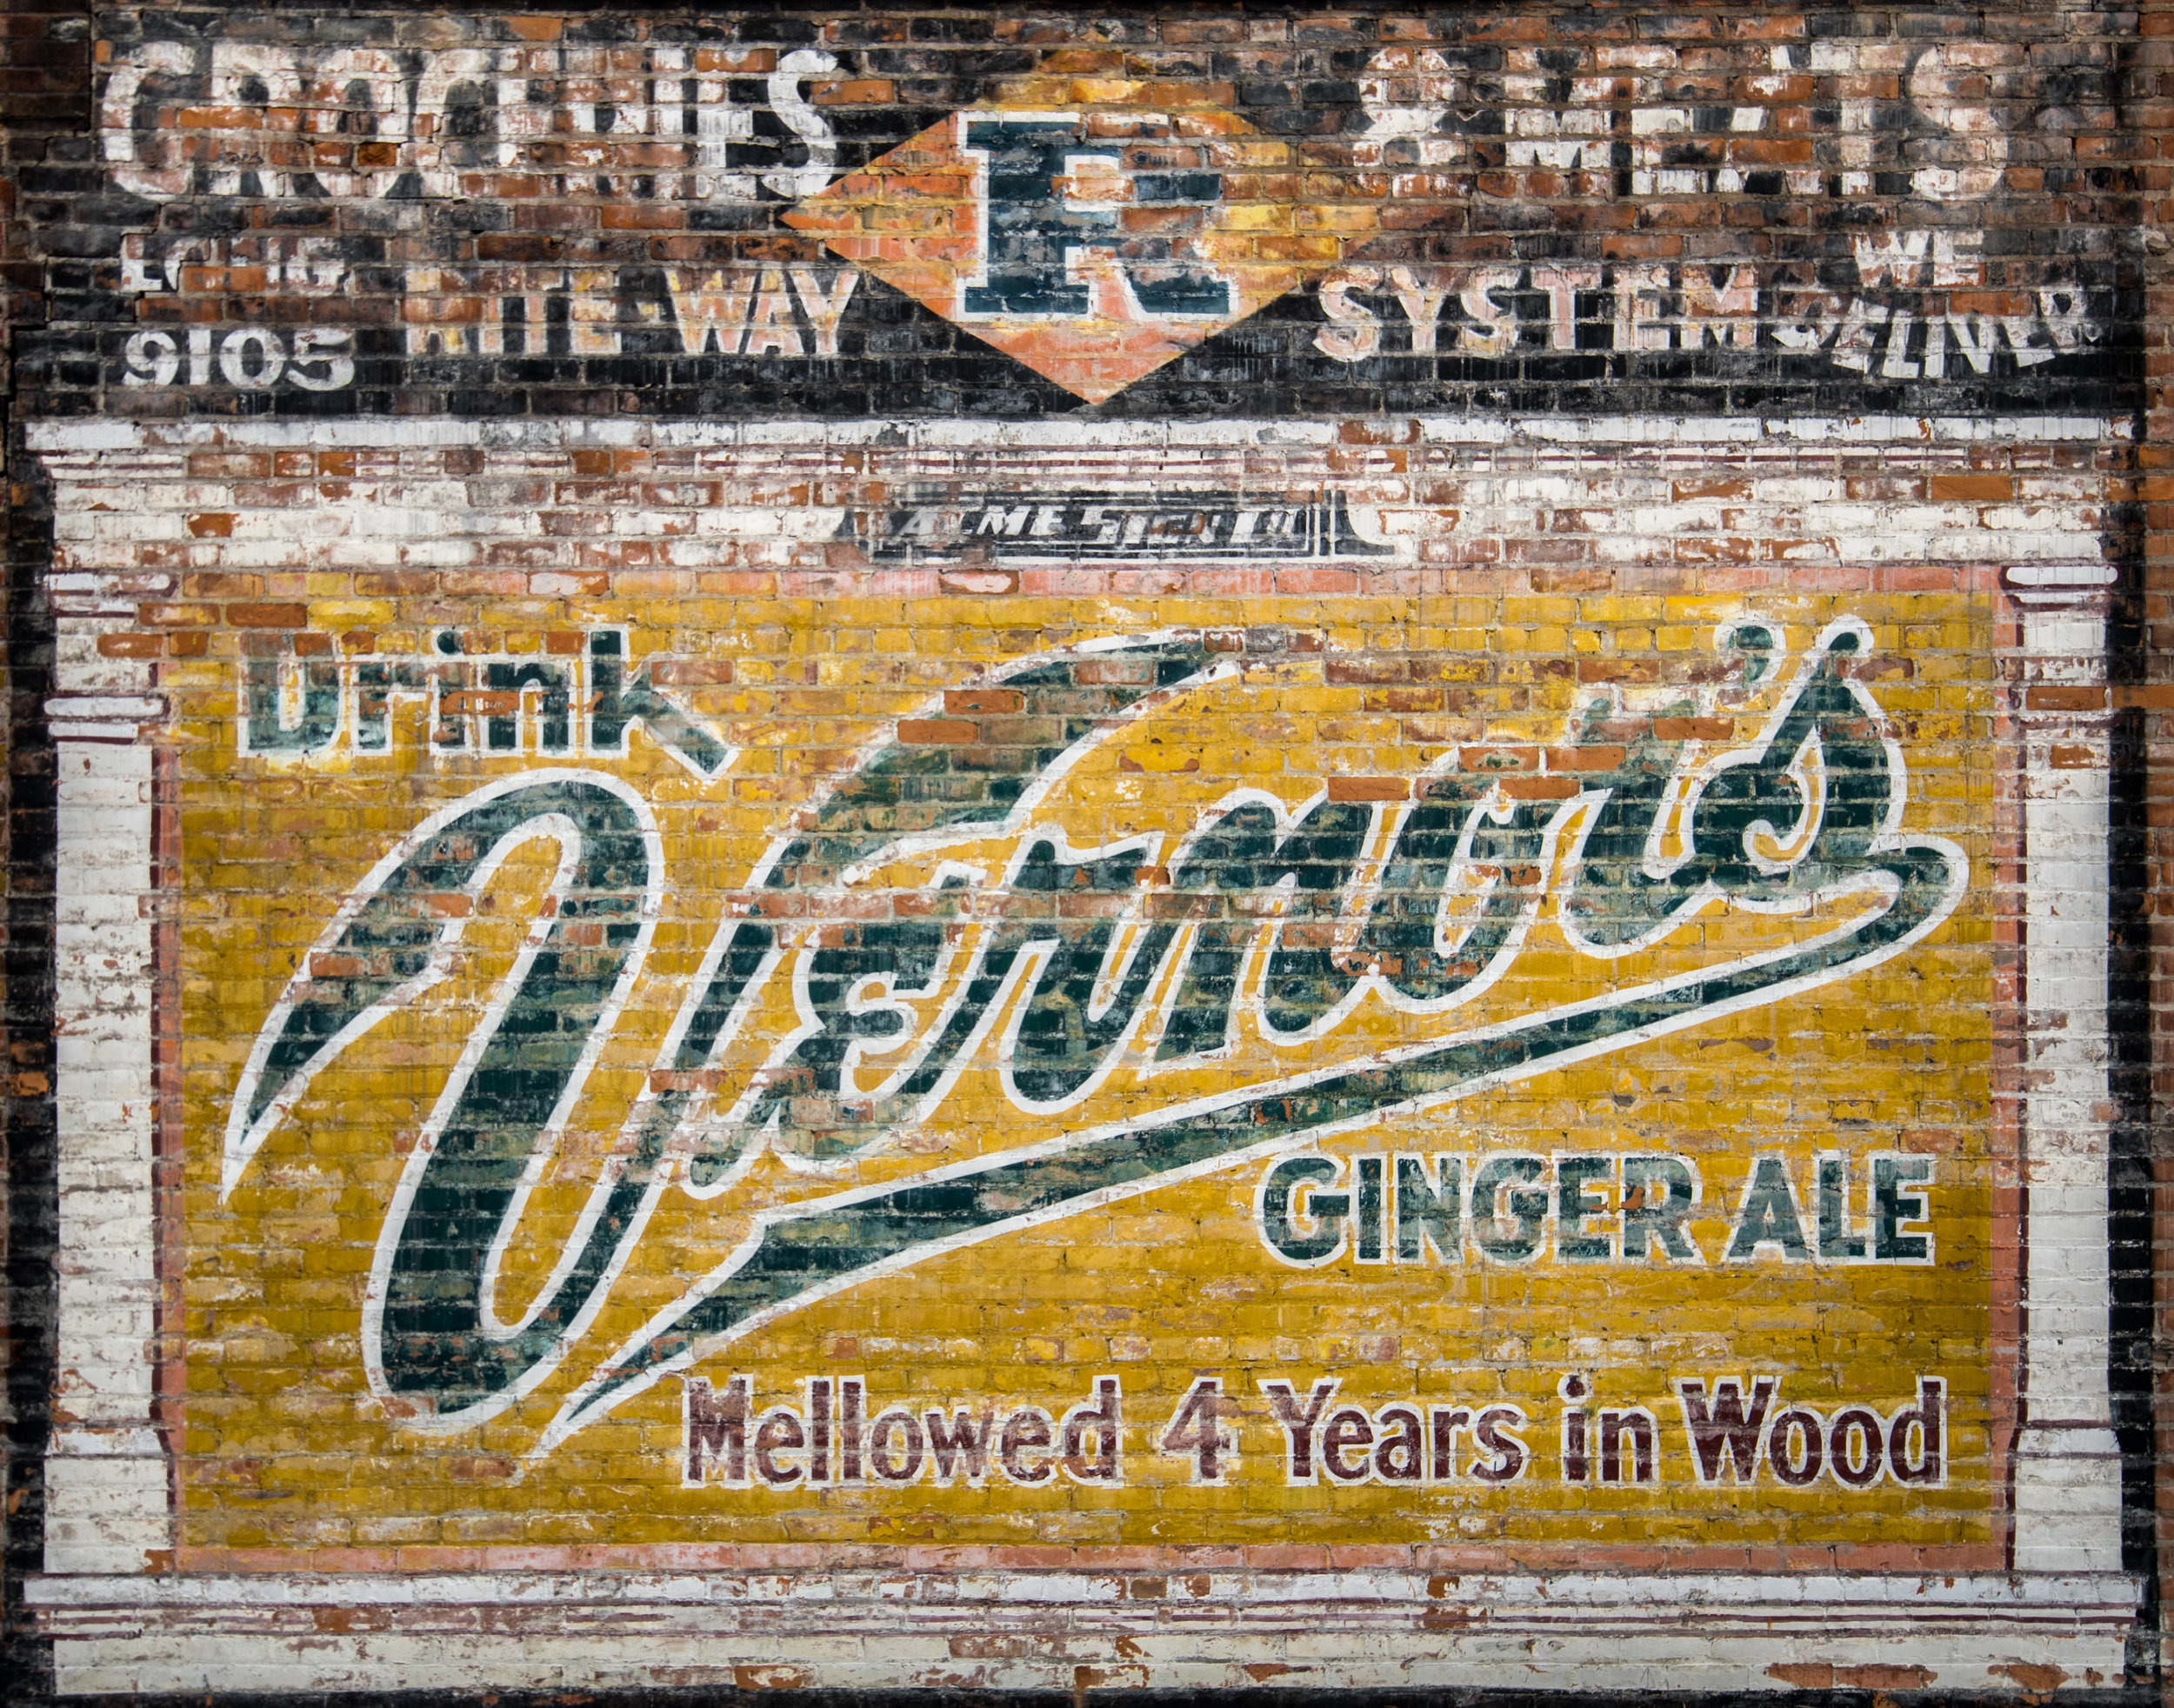 Vernor's Sign